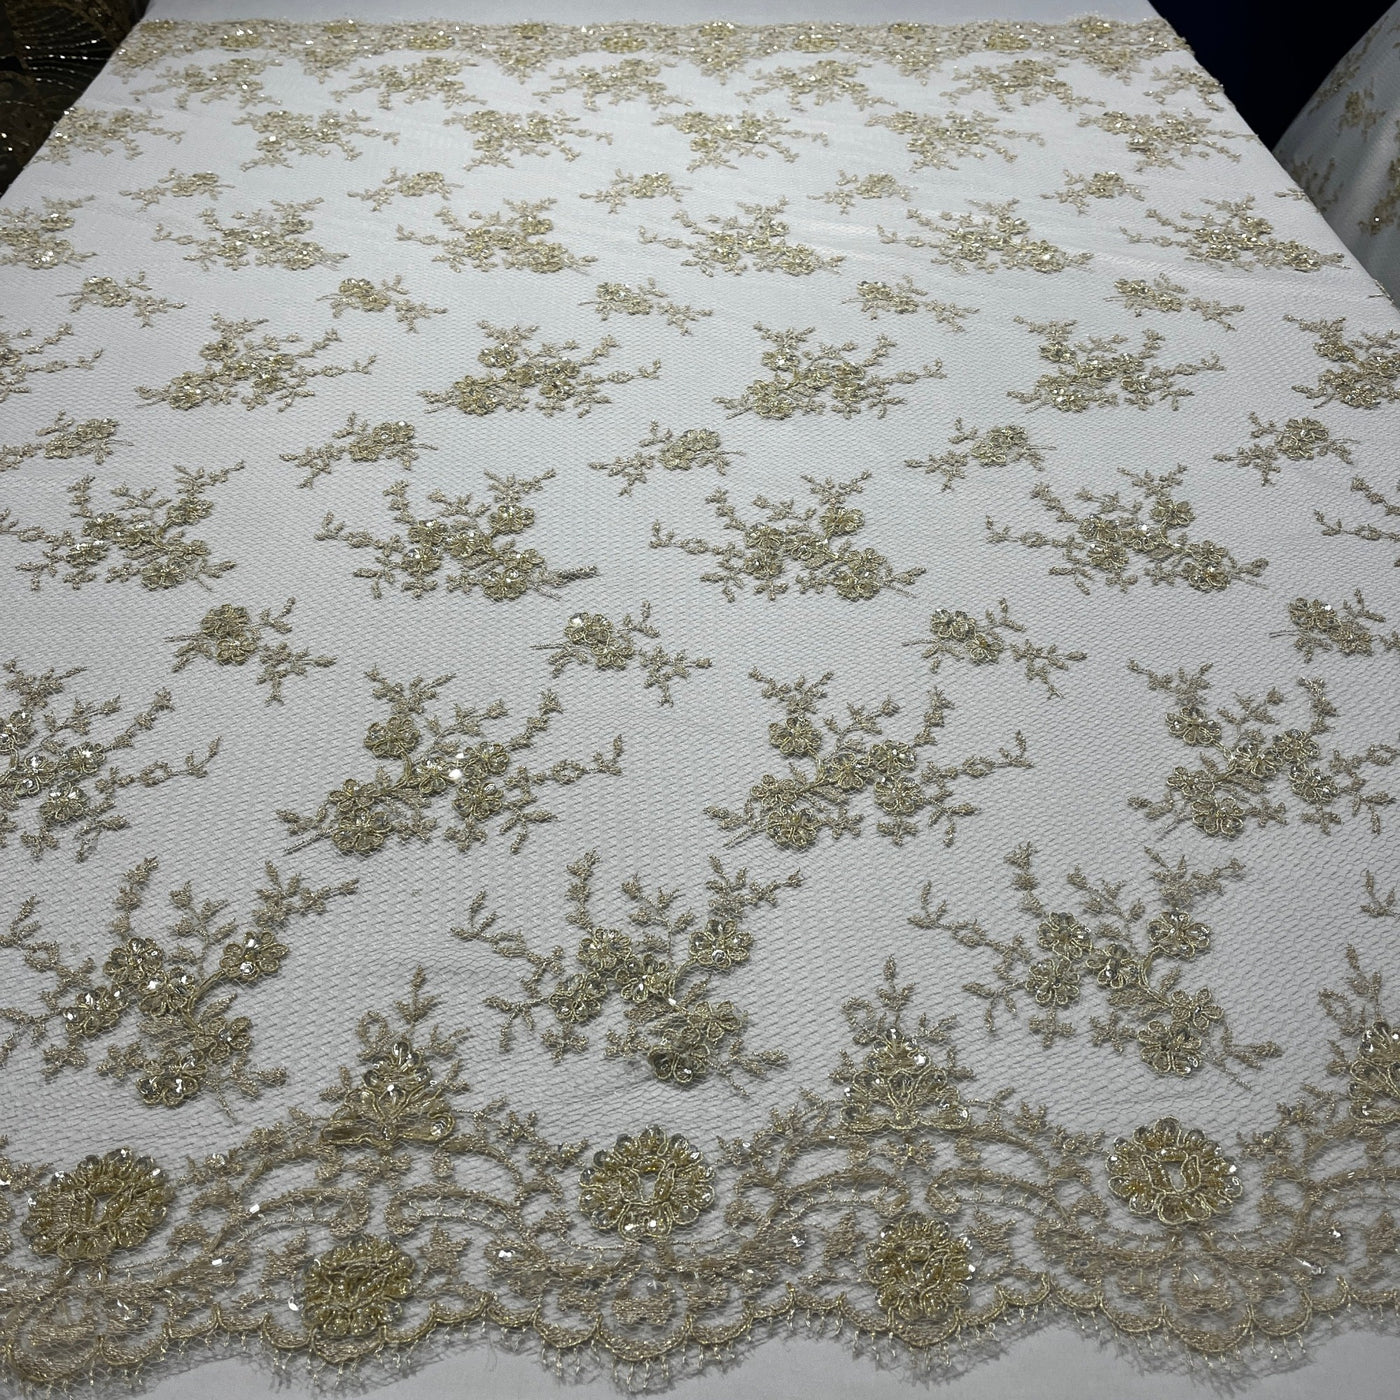 Beaded Lace Fabric Embroidered on 100% Polyester Net Mesh | Lace USA - 96731W-BP Gold